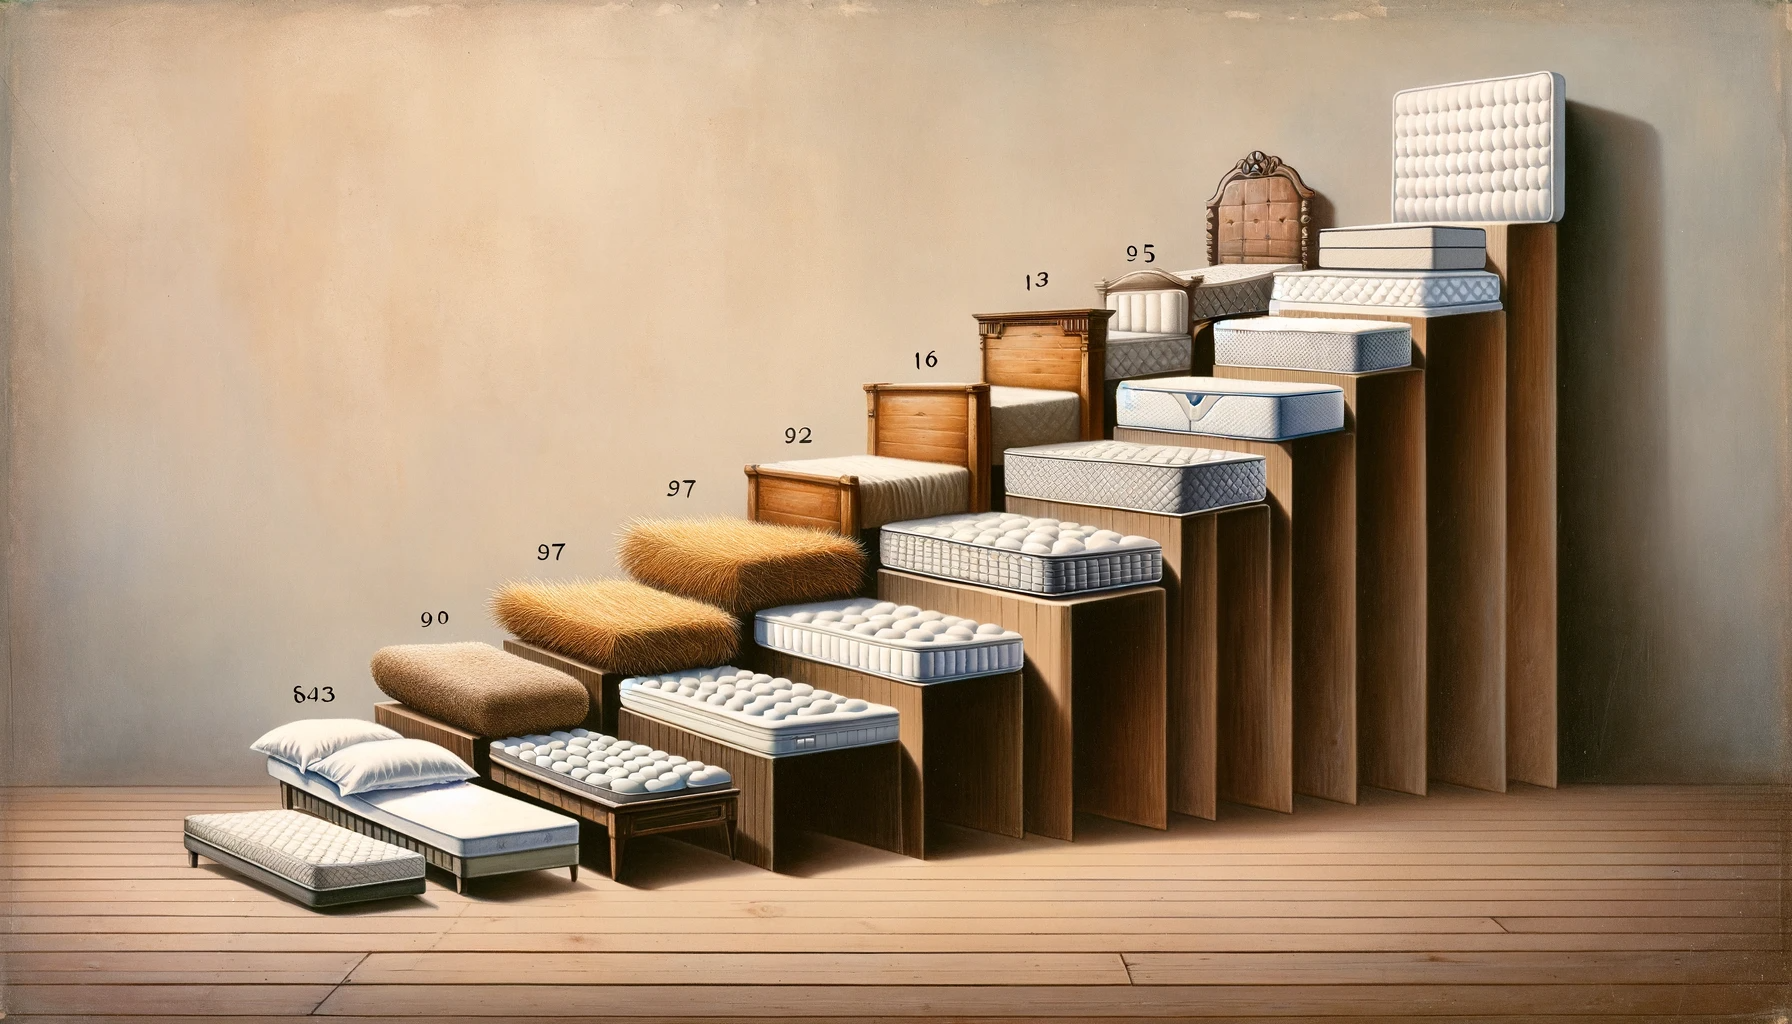 An artistic interpretation of the evolution of sleep technology, showing a progression from simple, ancient bedding to modern, sophisticated mattresses. The image should depict a sequence of beds starting with basic straw-filled mats, evolving through various historical styles, and culminating in contemporary designs featuring memory foam and high-tech materials.